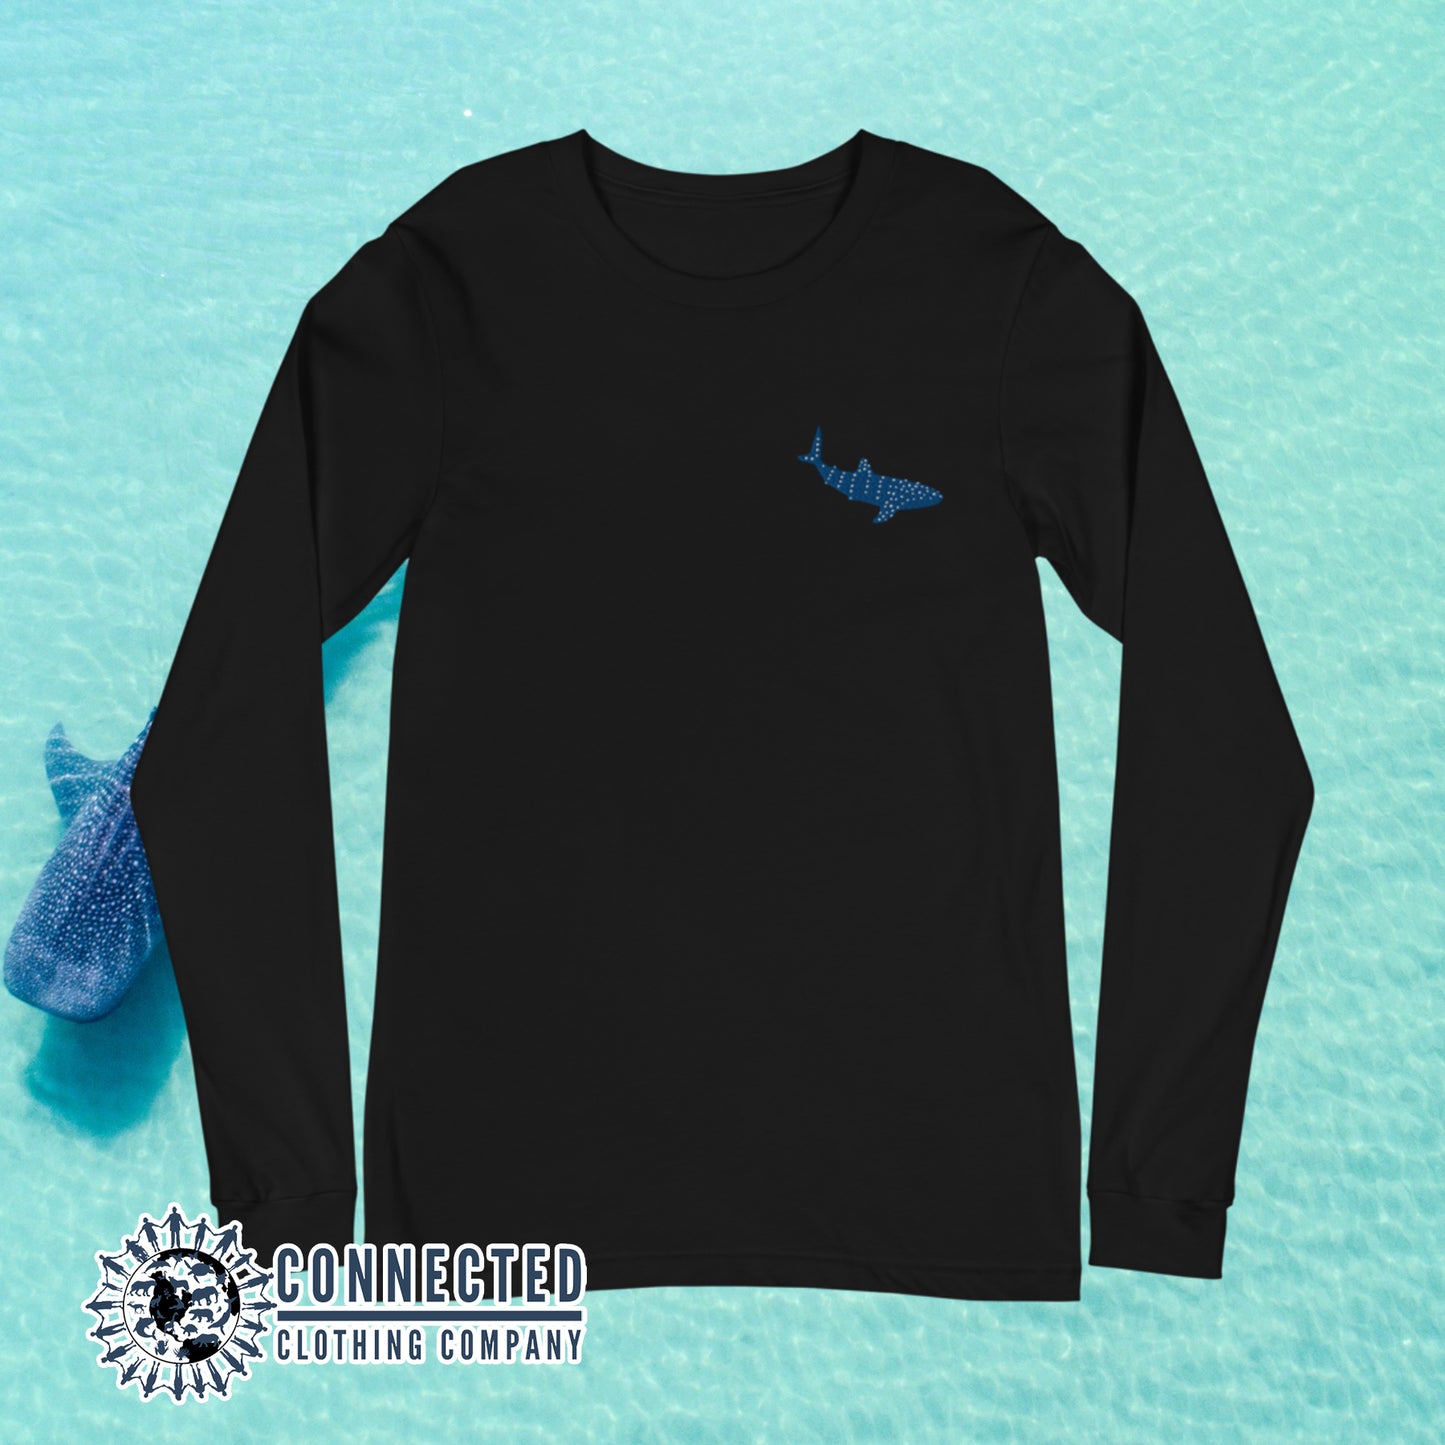 Blsck Embroidered Whale Shark Long-Sleeve Shirt - sweetsherriloudesigns - Ethically and Sustainably Made - 10% of profits donated to shark conservation and ocean conservation